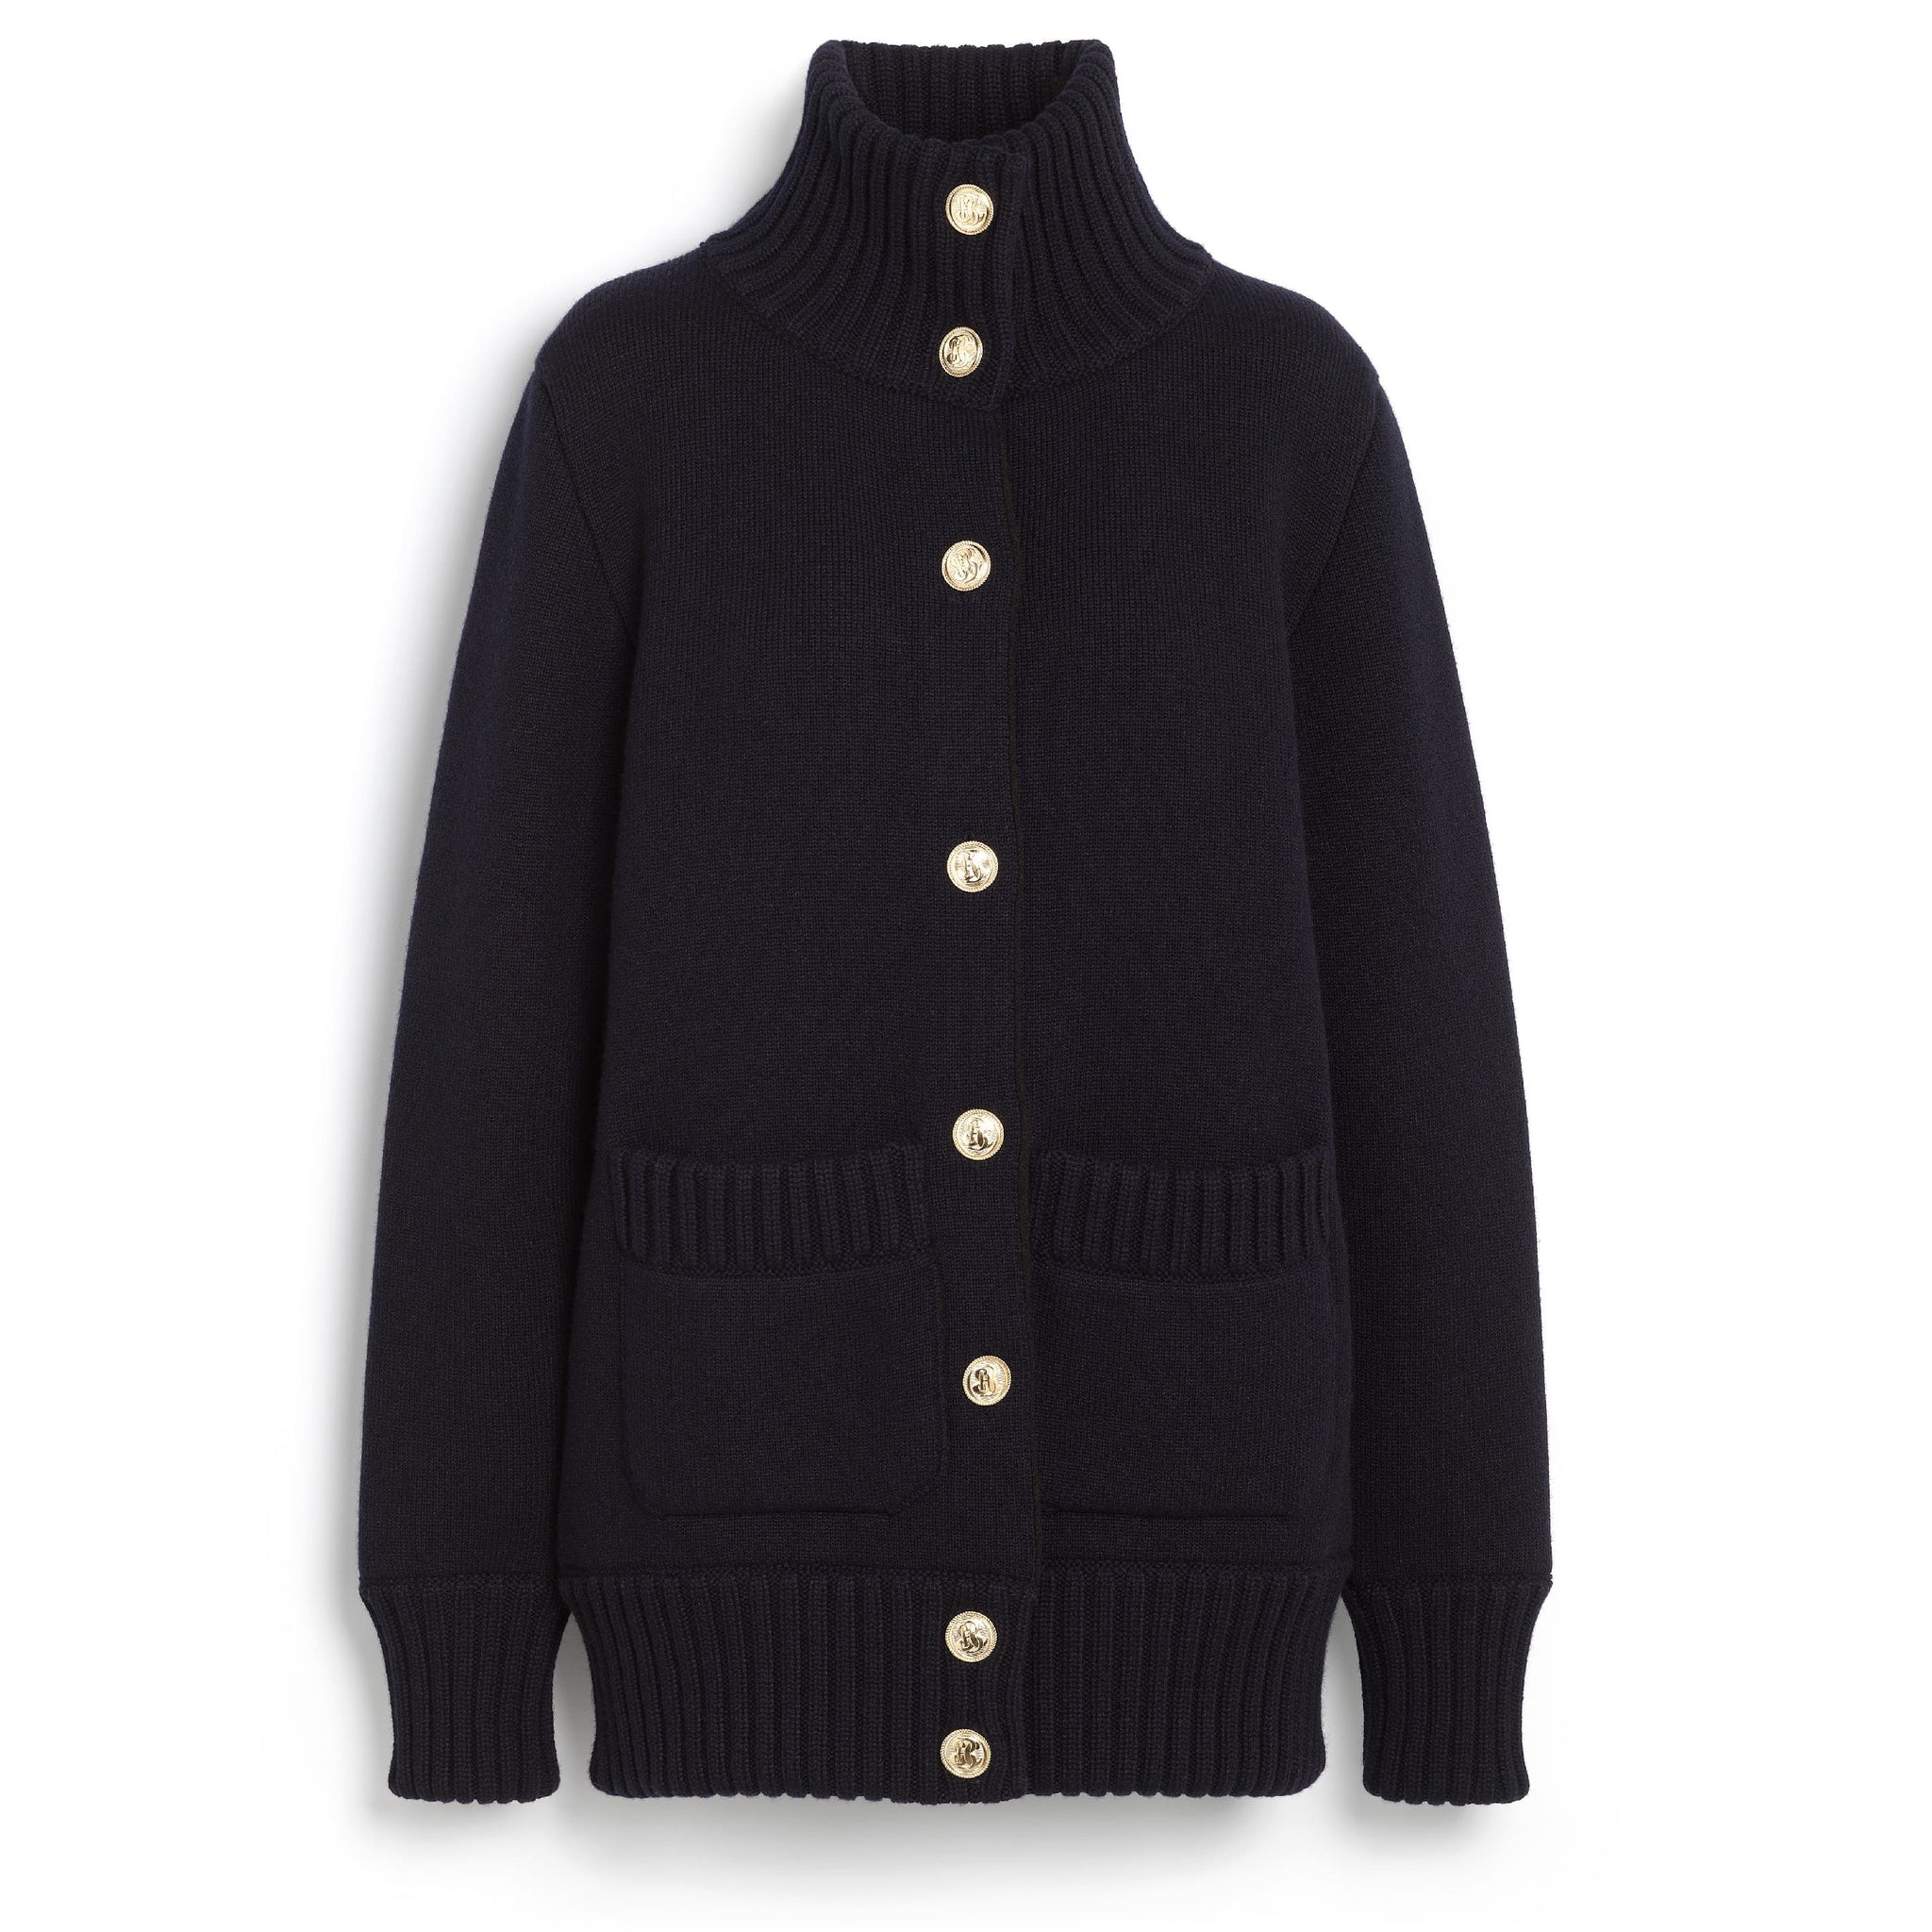 Warm jacket in cashmere, wool and silk | Barrie + Sofia Coppola ...